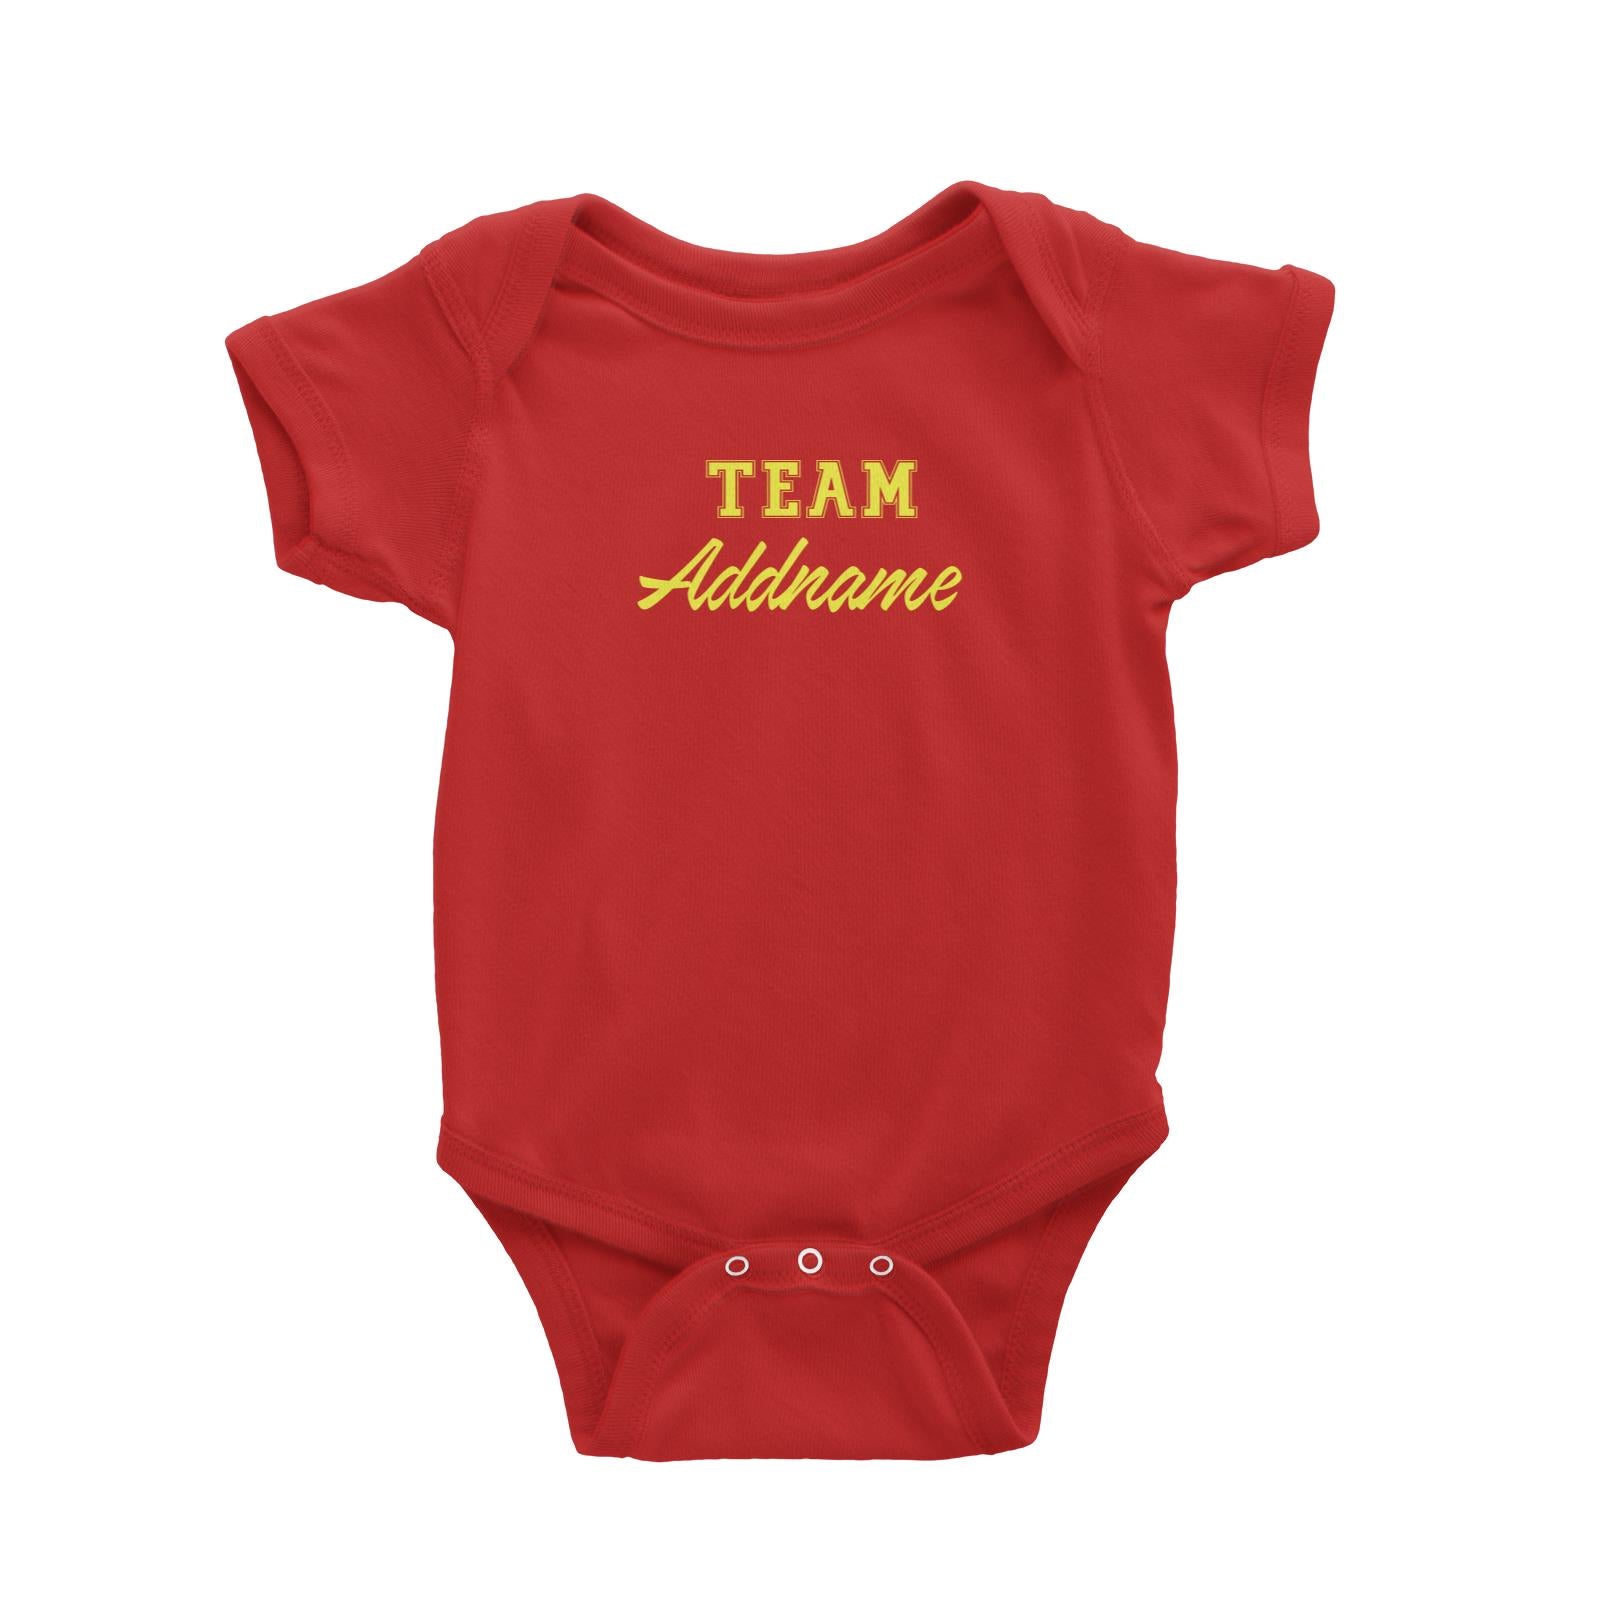 Team Family Addname Baby Romper